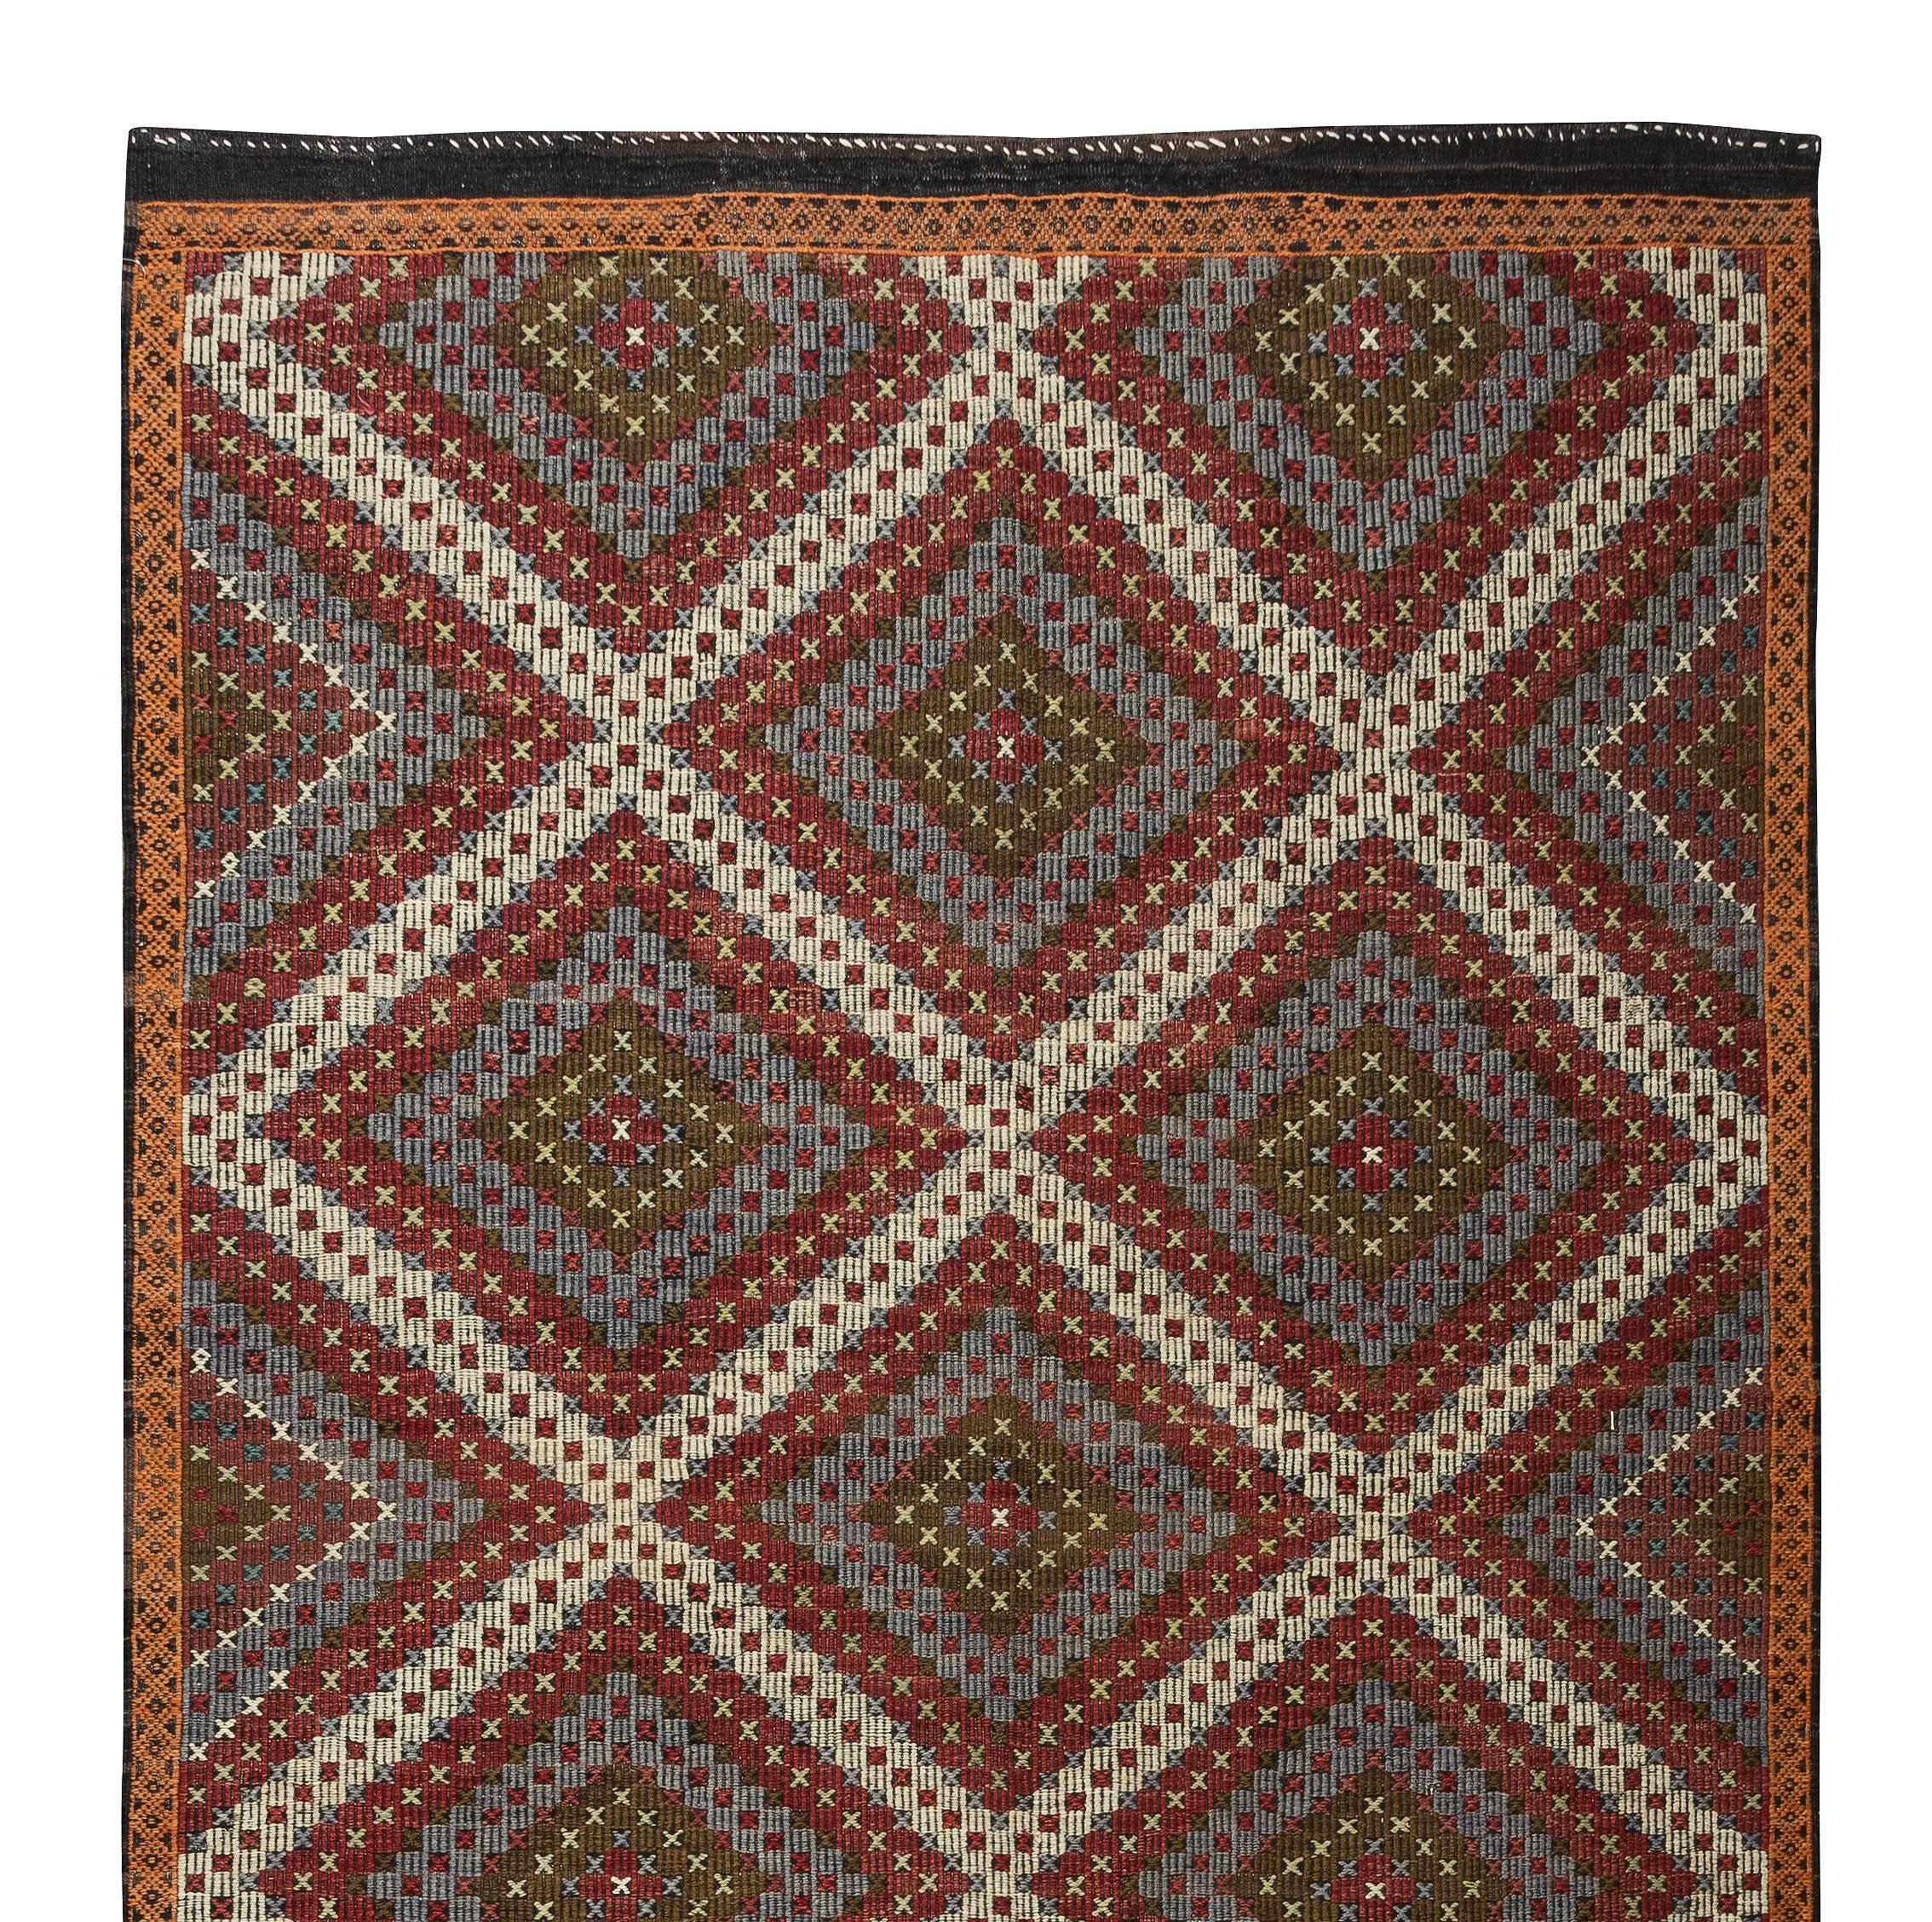 Vintage Turkish Wool Jajim Kilim, One of a Kind Handwoven Bohemian Rug In Good Condition For Sale In Philadelphia, PA